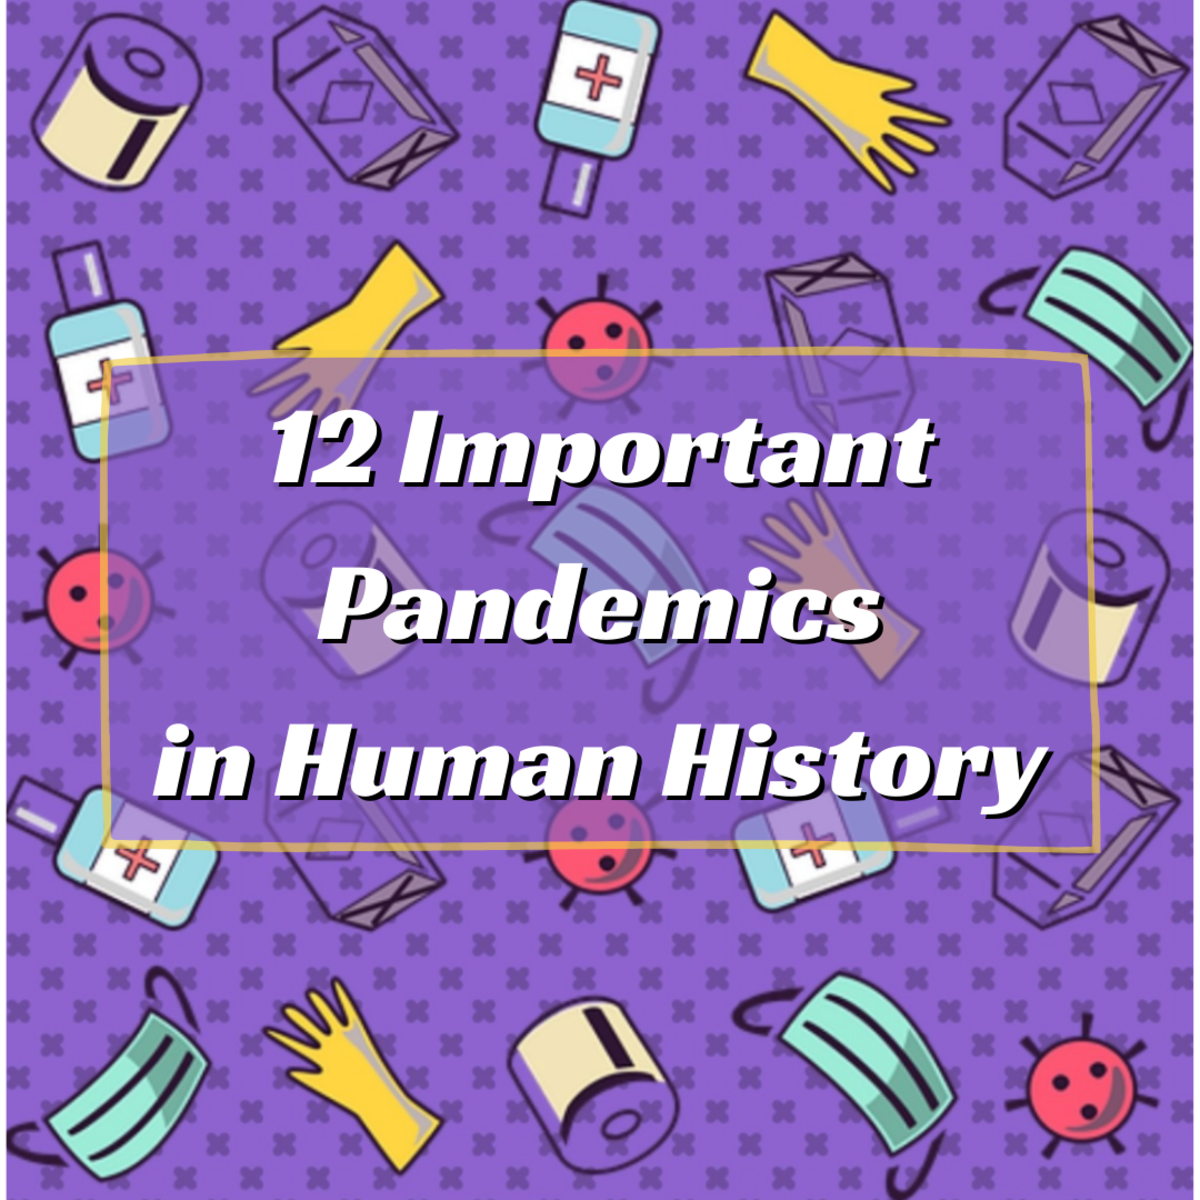 12 Significant Disease Pandemics in Human History